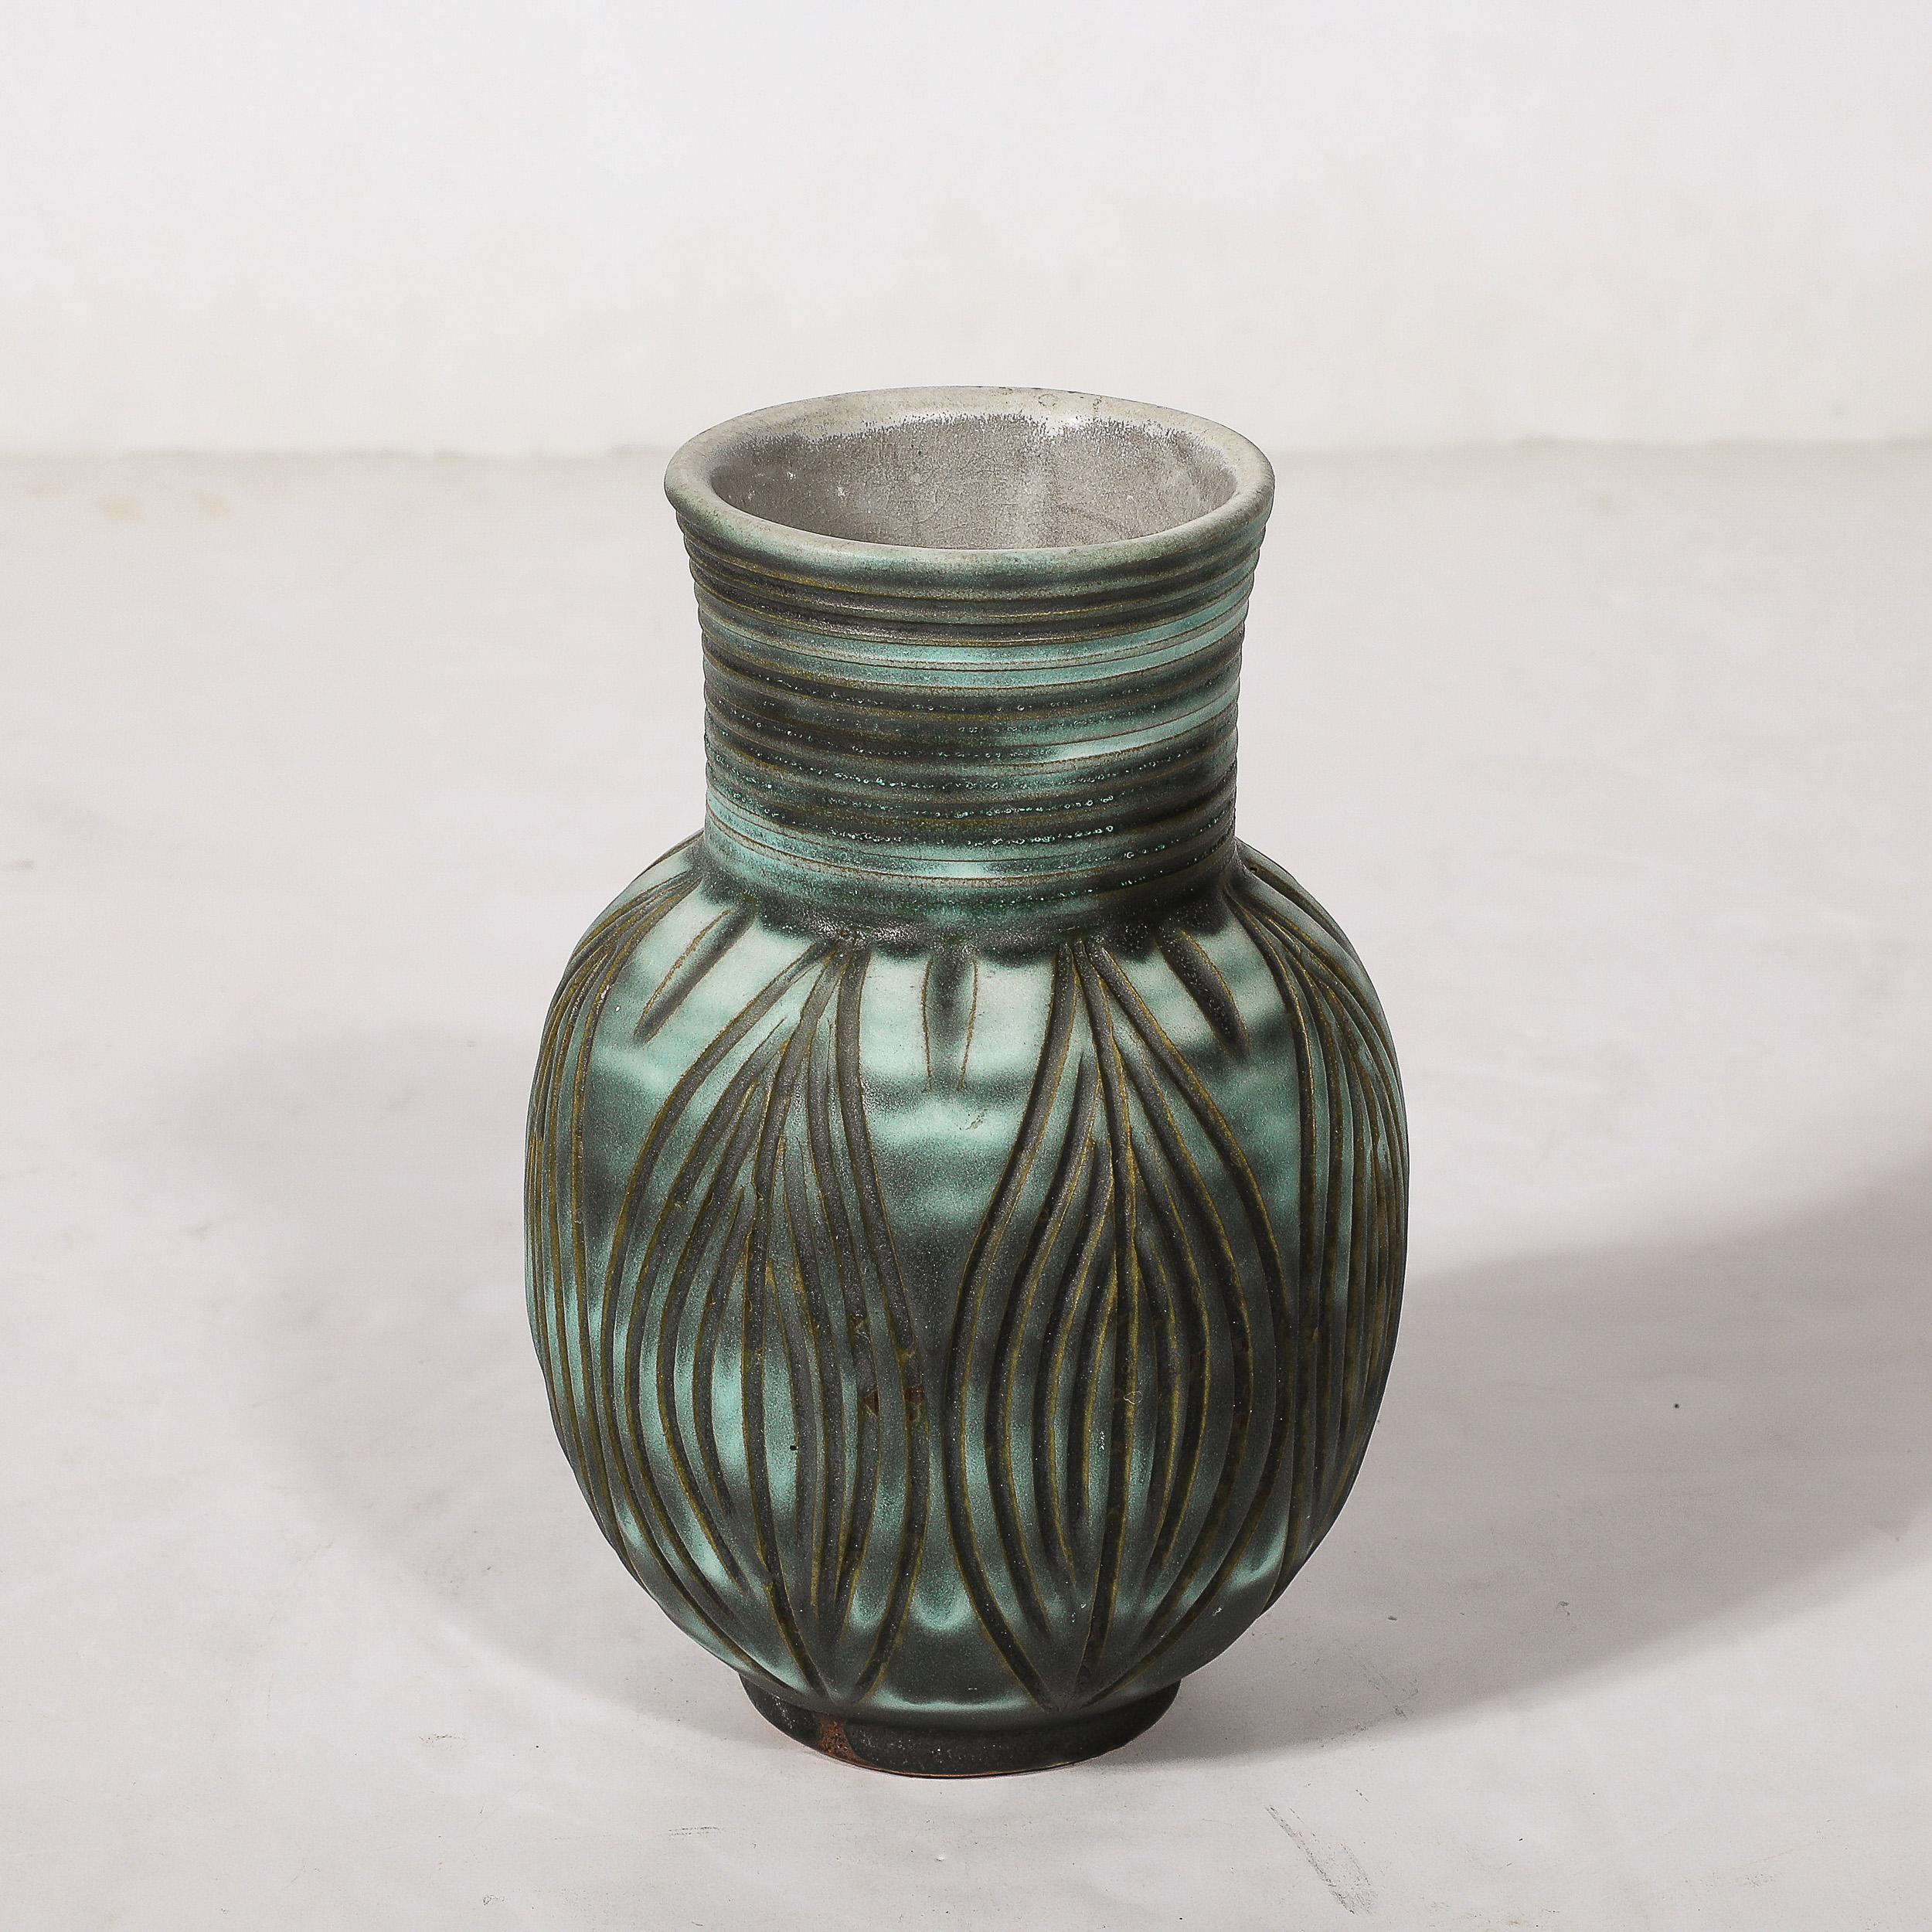 American Mid-Century Modernist Linear Grooved Teal/Smoked Umber Vase by Design Techniques For Sale